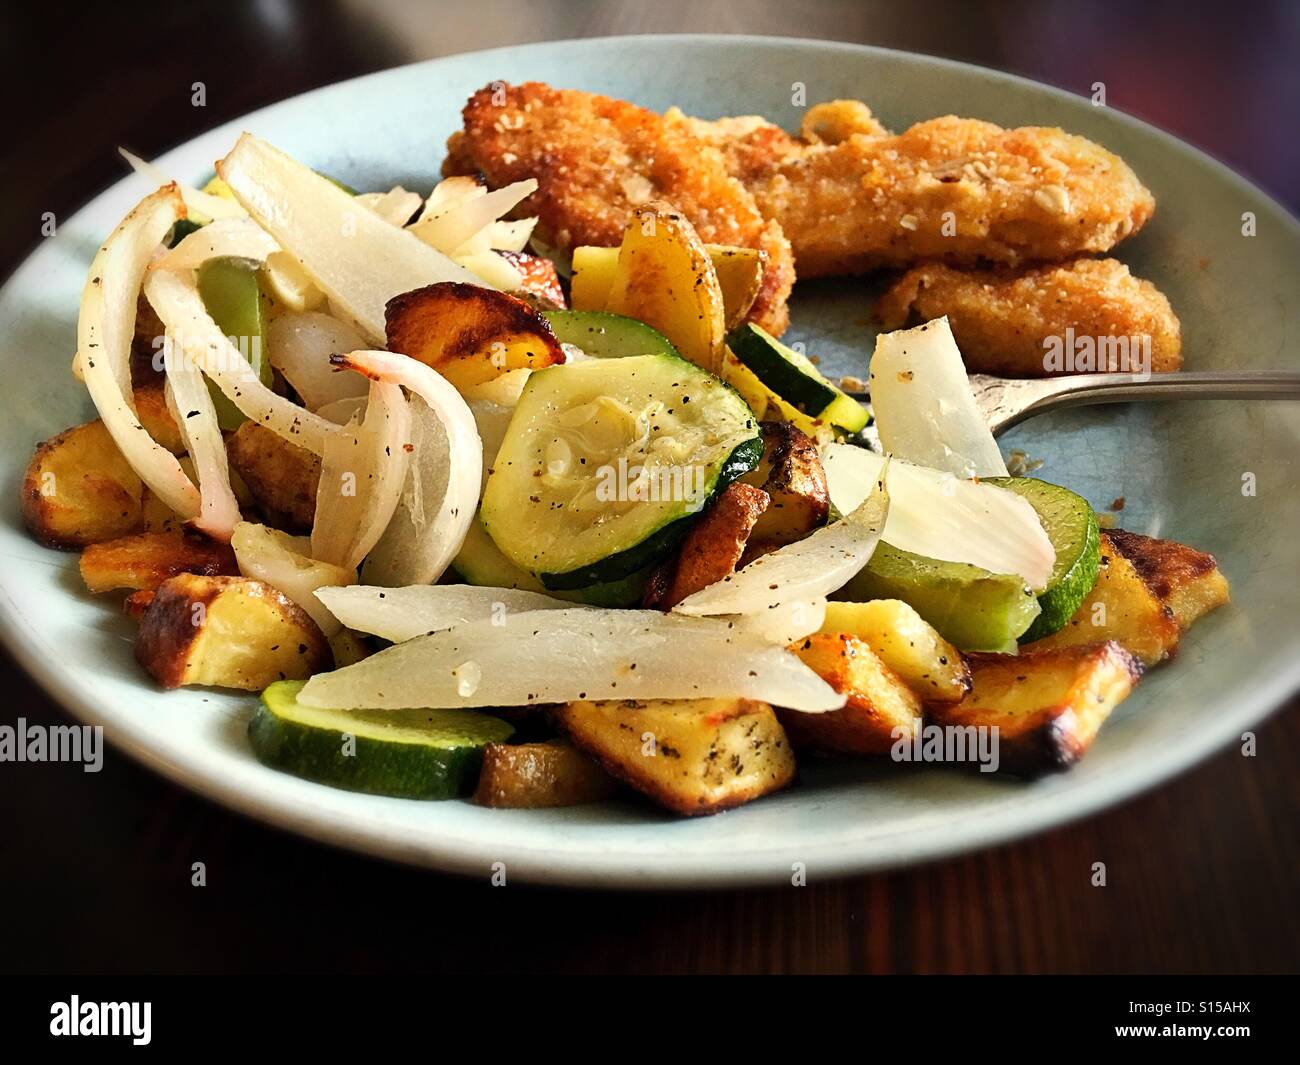 A vegan meal of roasted vegetables and meat free tenders. Stock Photo